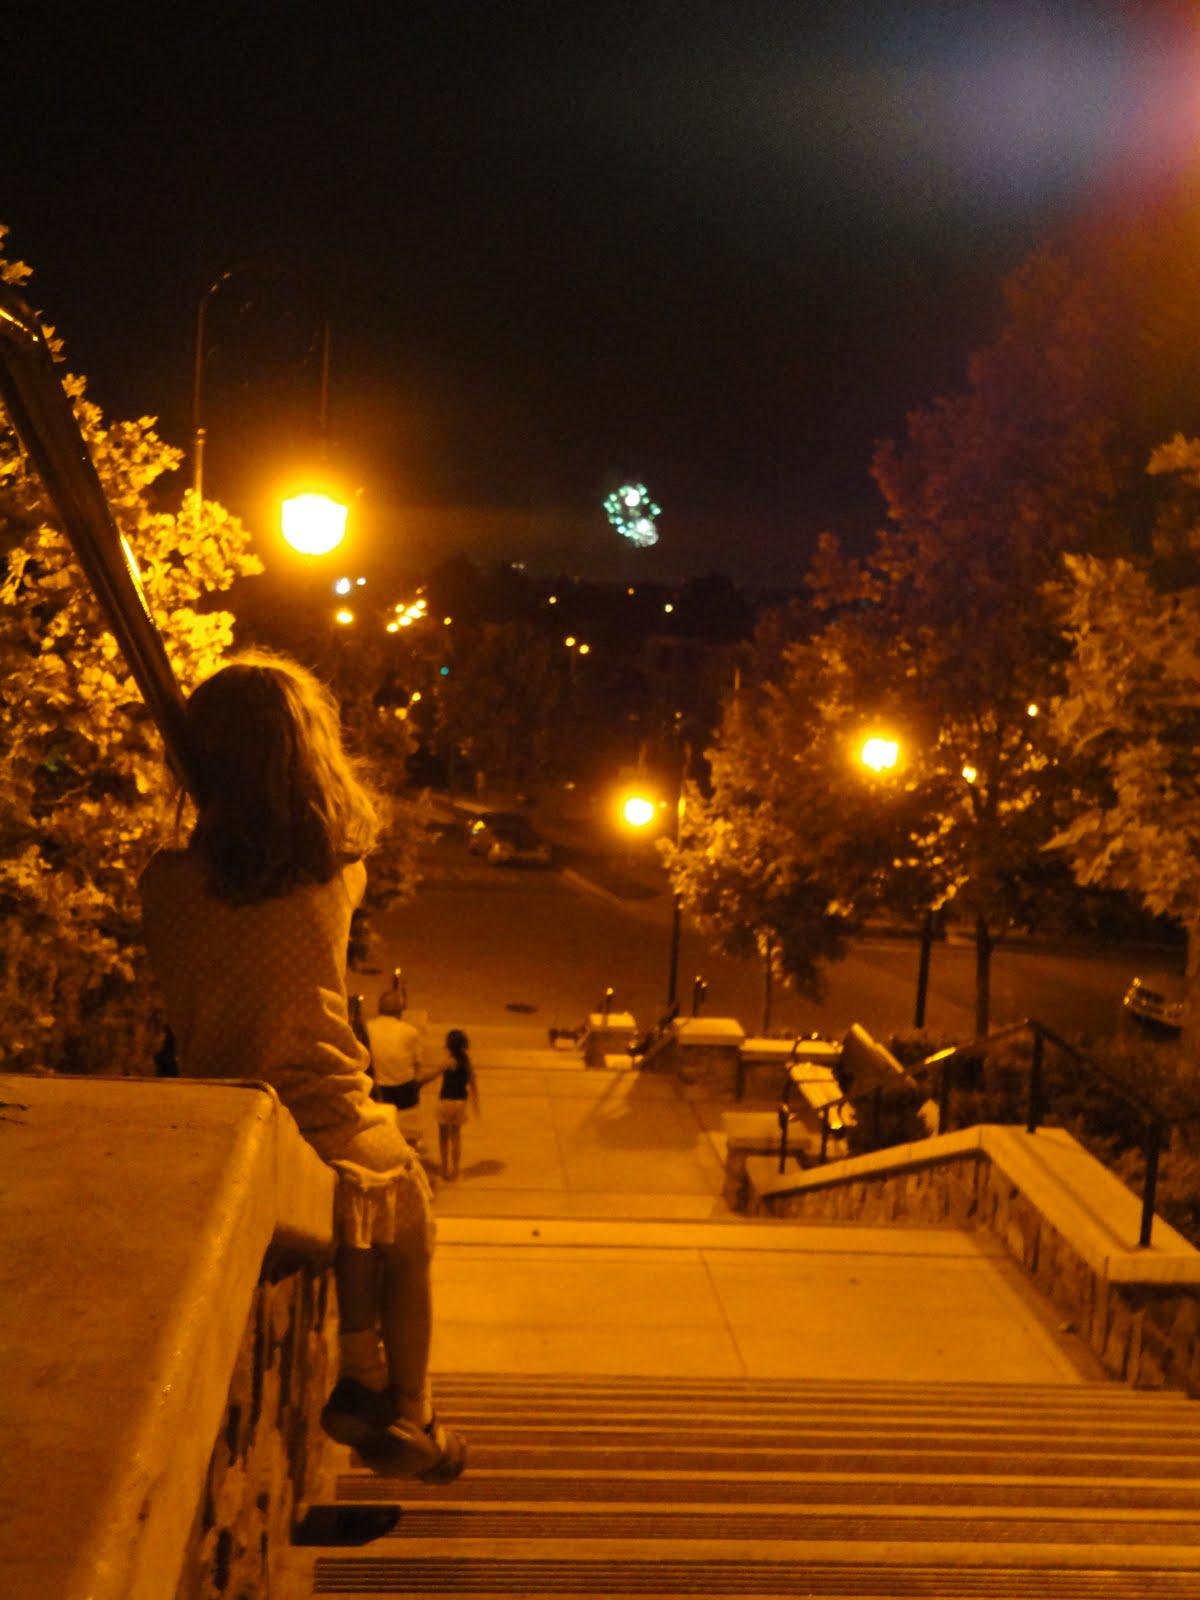 Fireworks in the distance